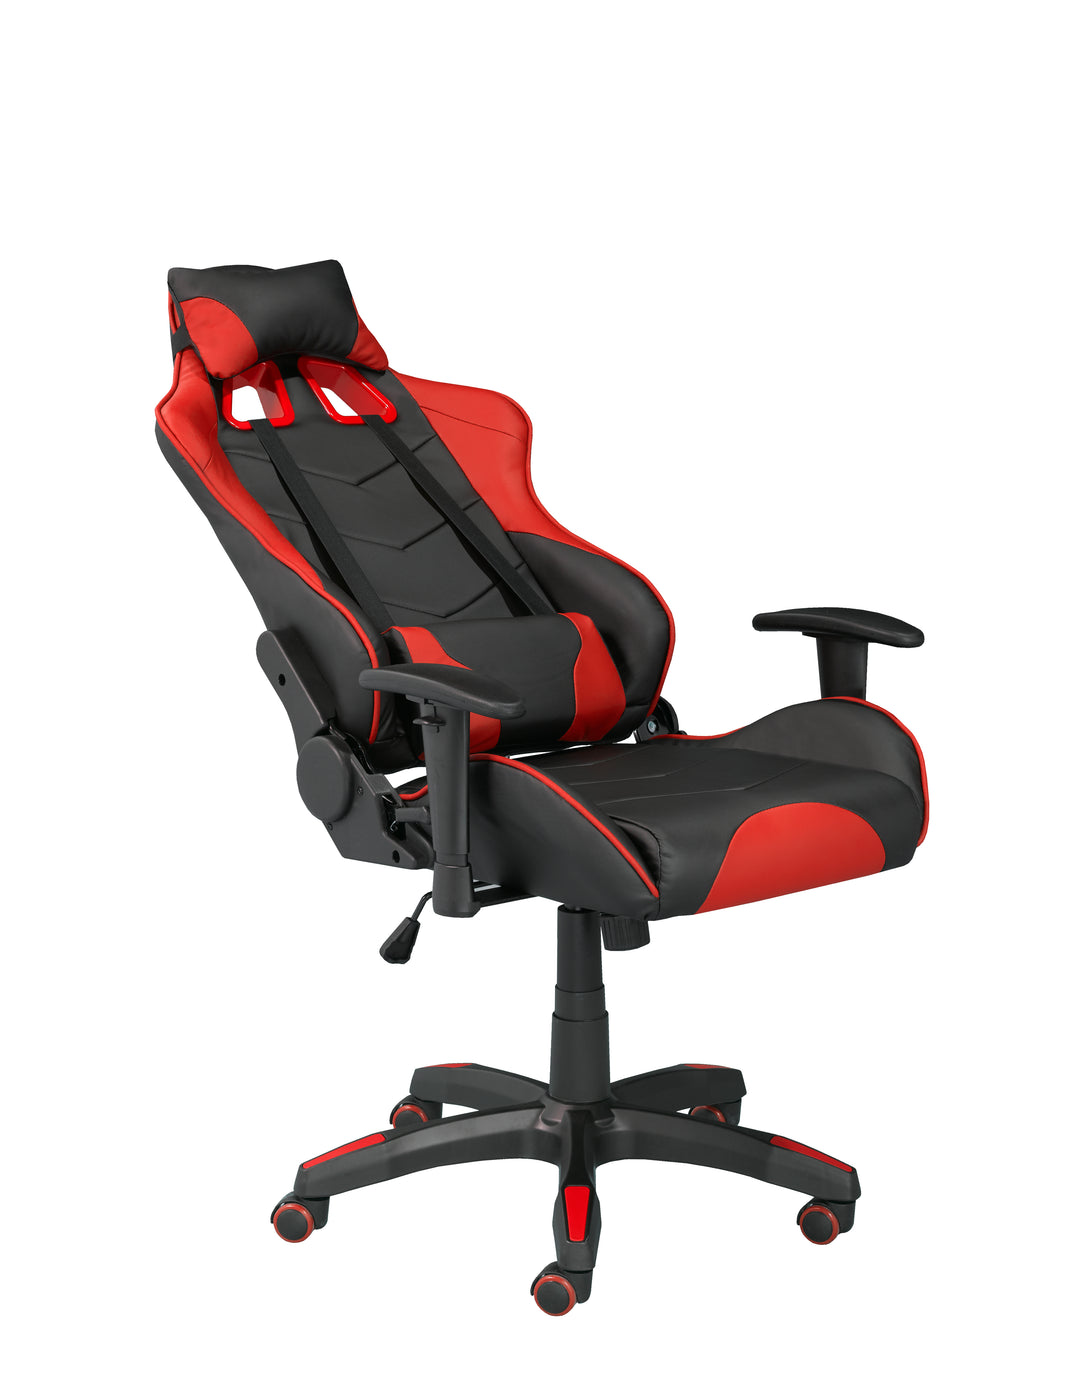 Sleek Black/Red Gaming Chair - Elevate Your Gameplay with Ergonomic Comfort and Dynamic Design